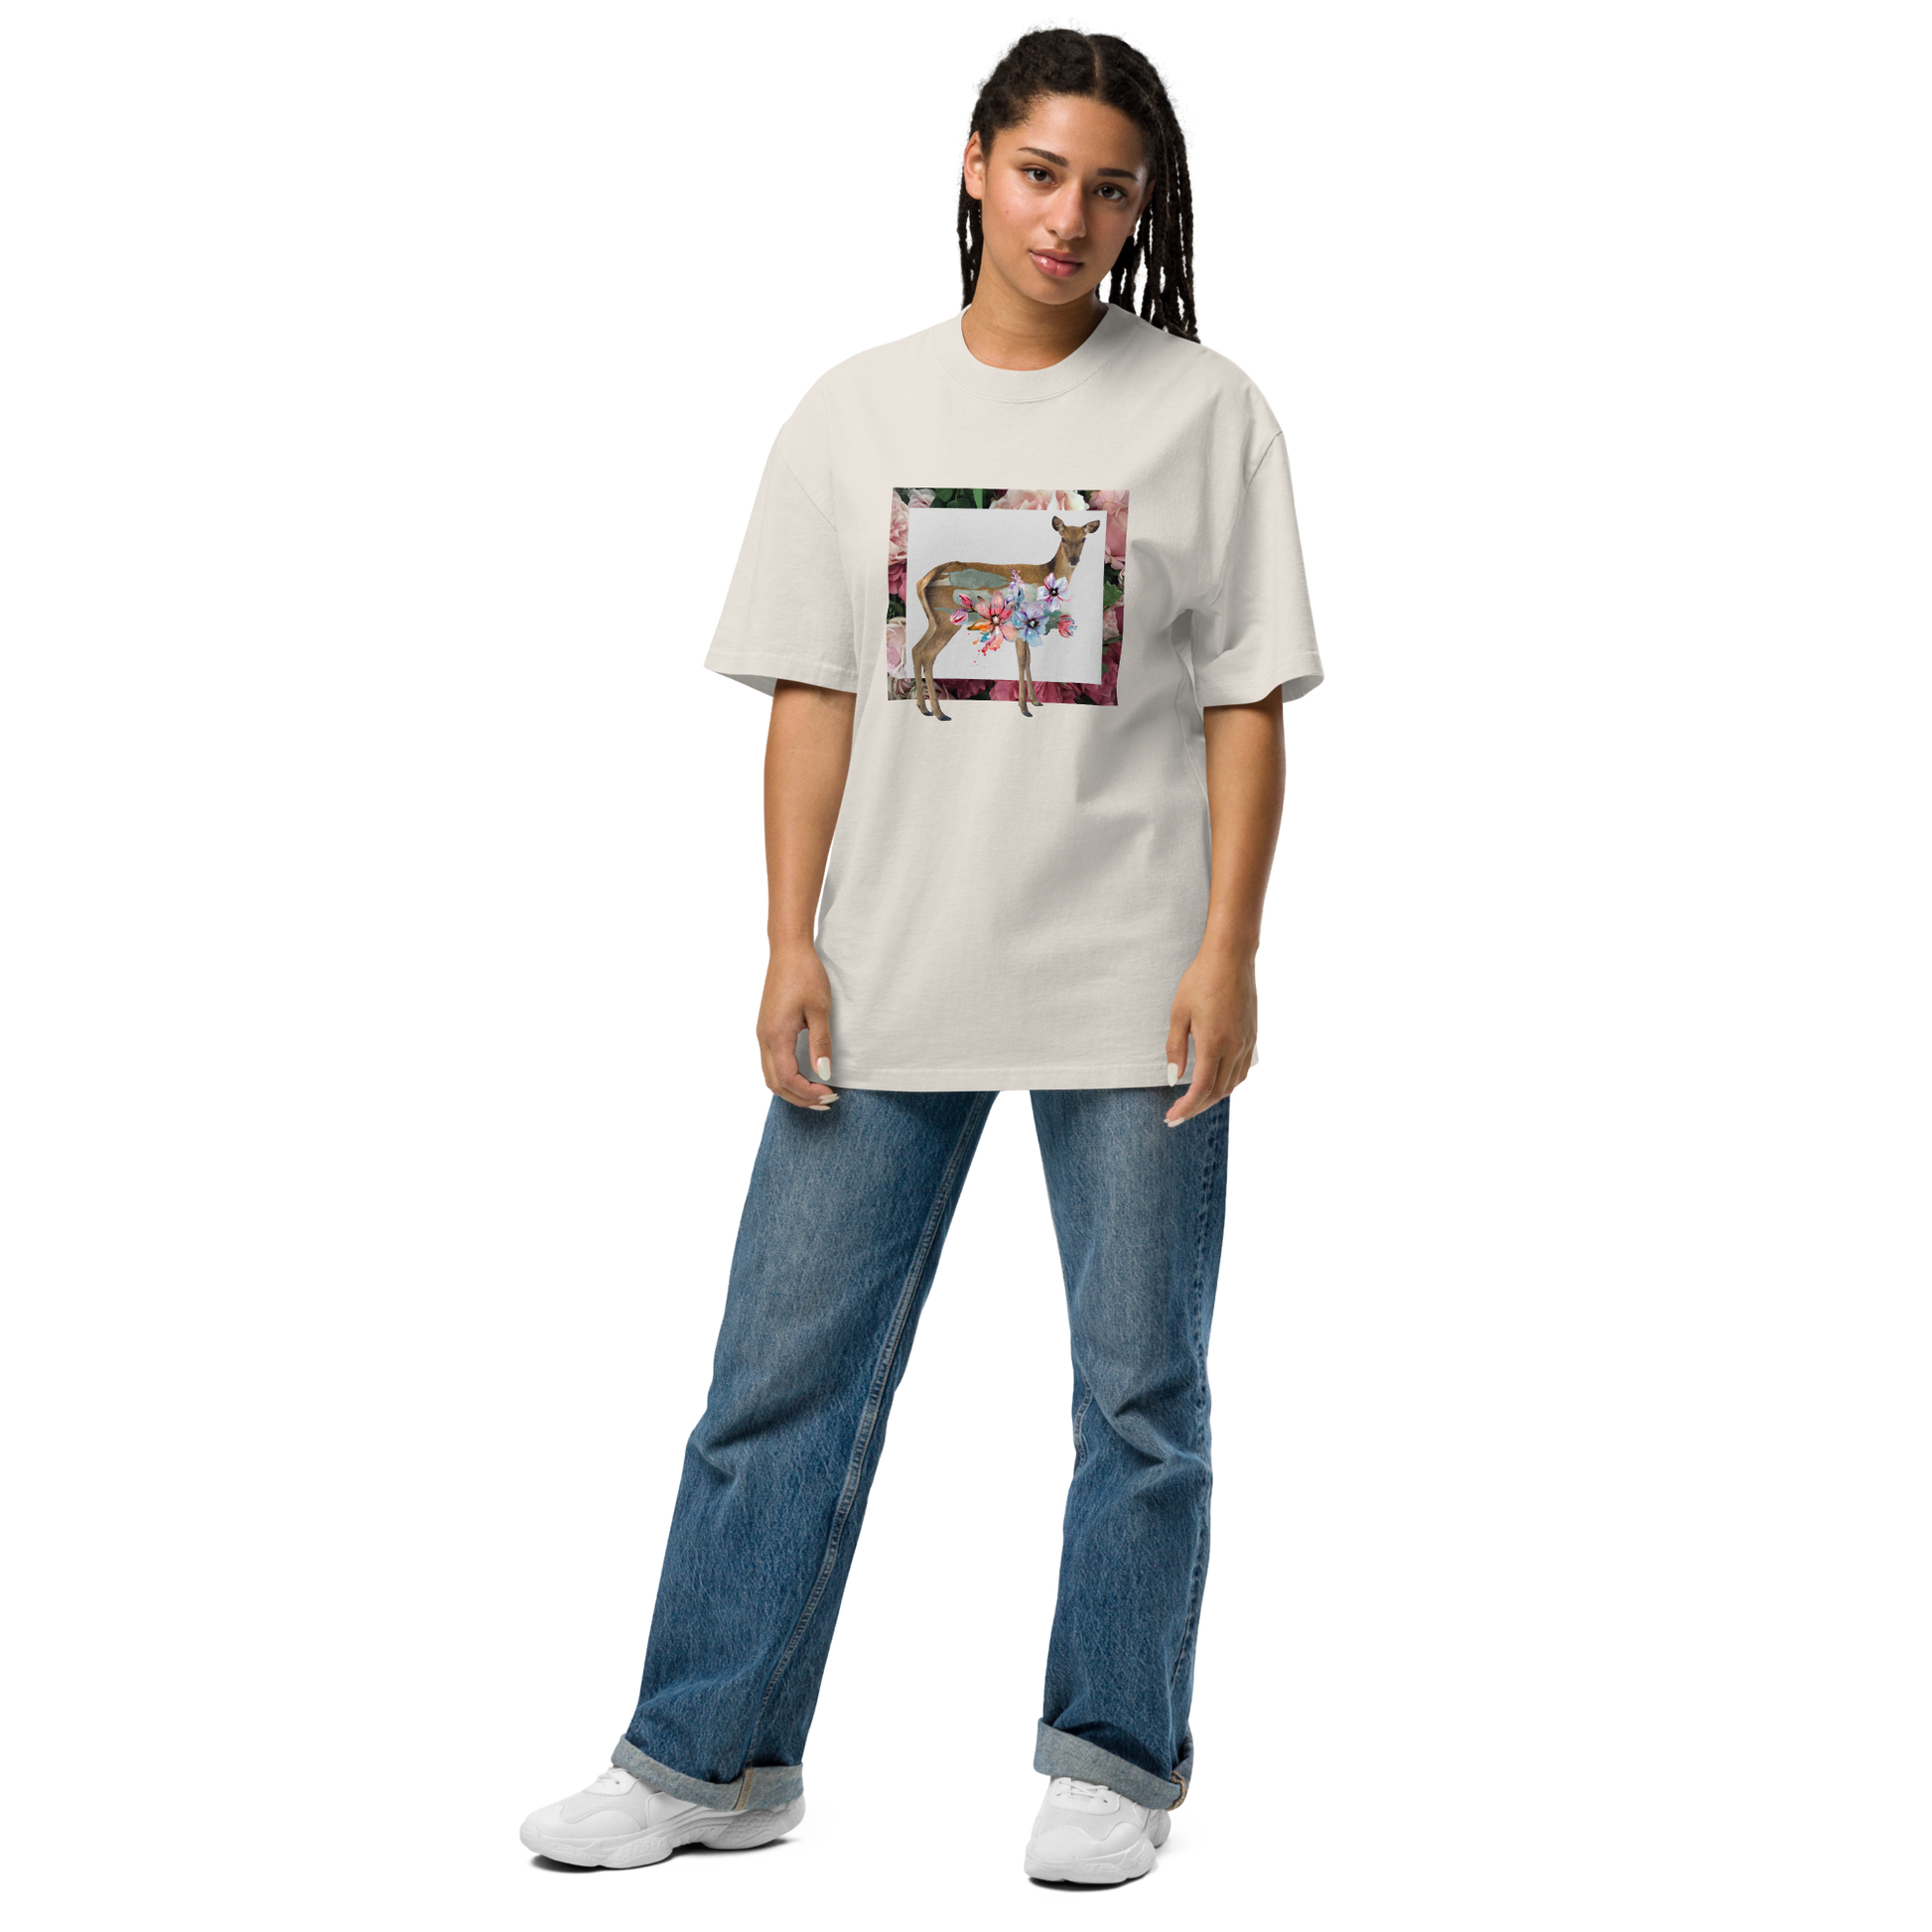 Woman wearing a Faded Bone Deer Oversized T-Shirt featuring a captivating Floral Deer graphic on the chest - Cute Graphic Deer Oversized Tees - Boozy Fox